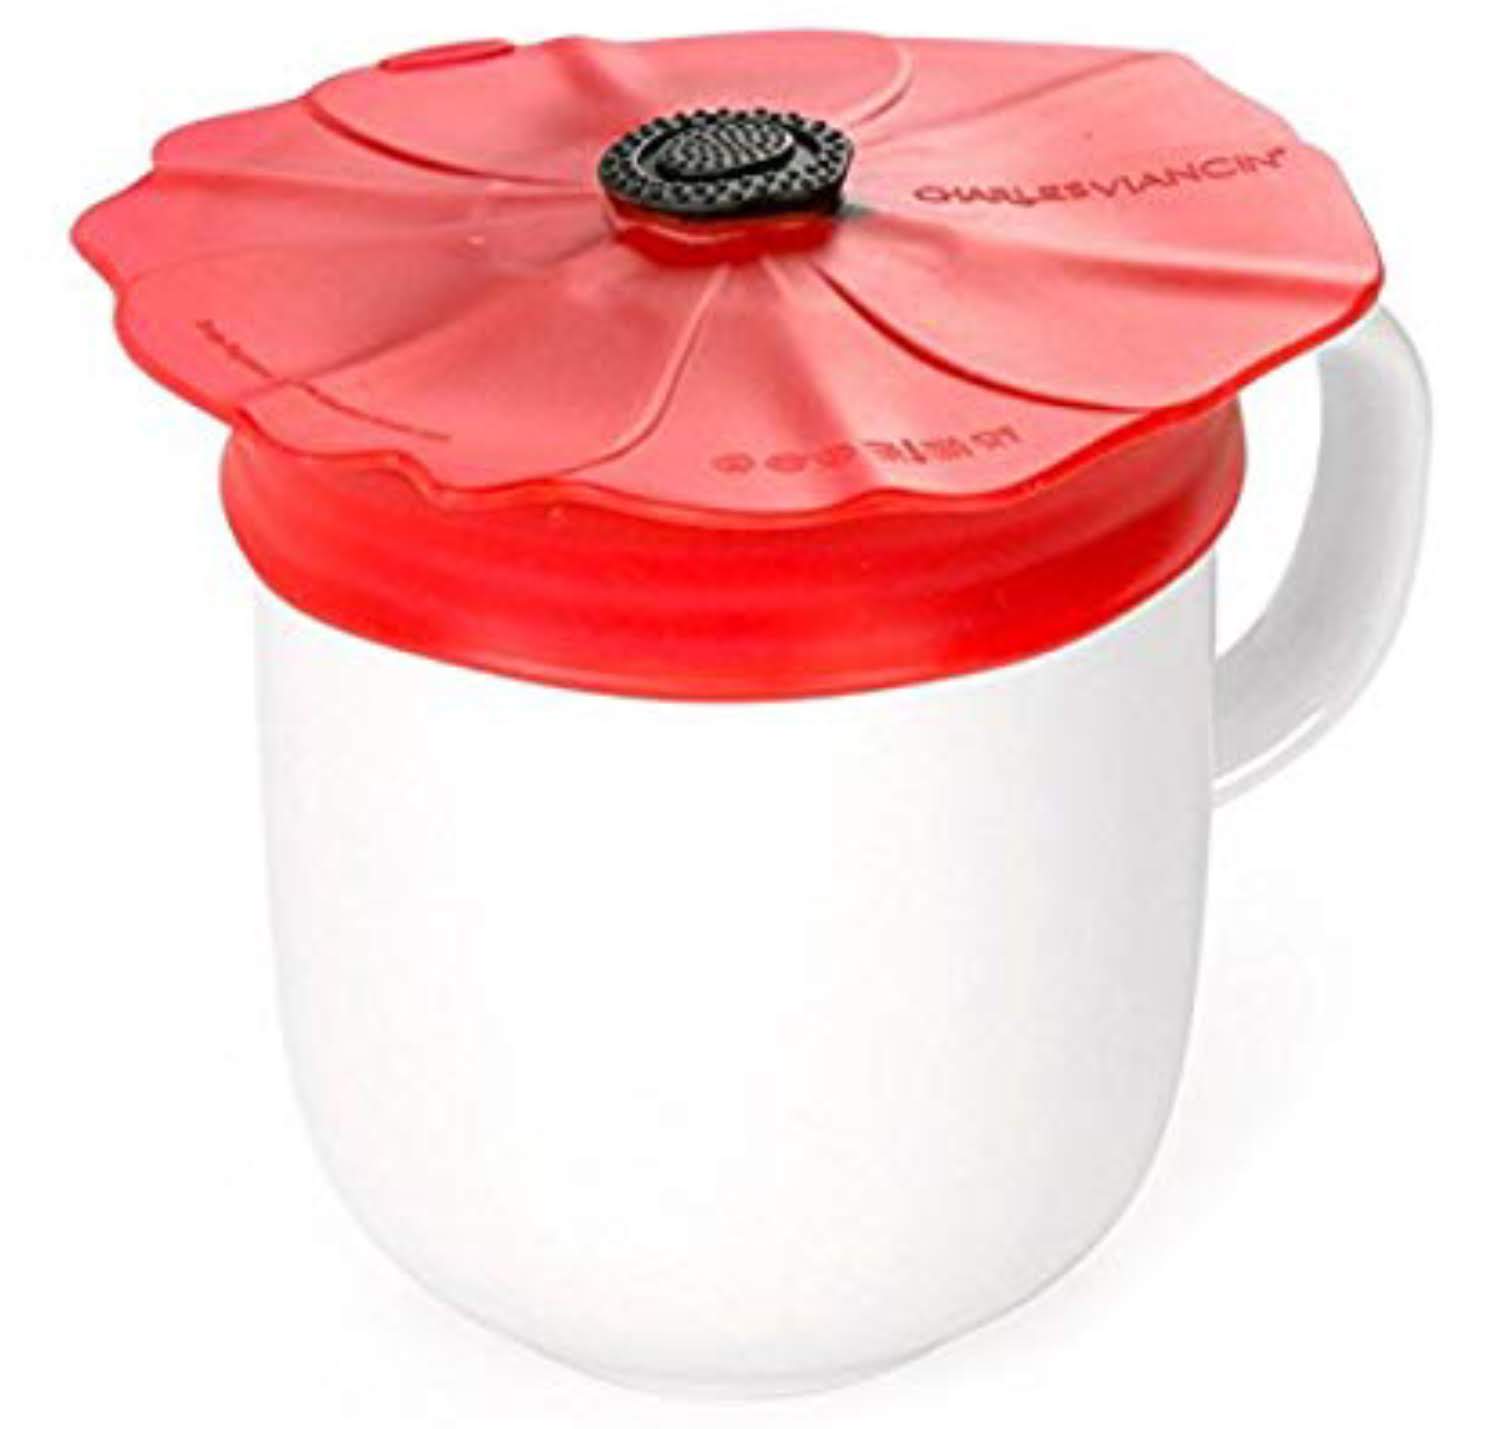 Charles Viancin Poppy Pop Spill-Proof Drink Covers